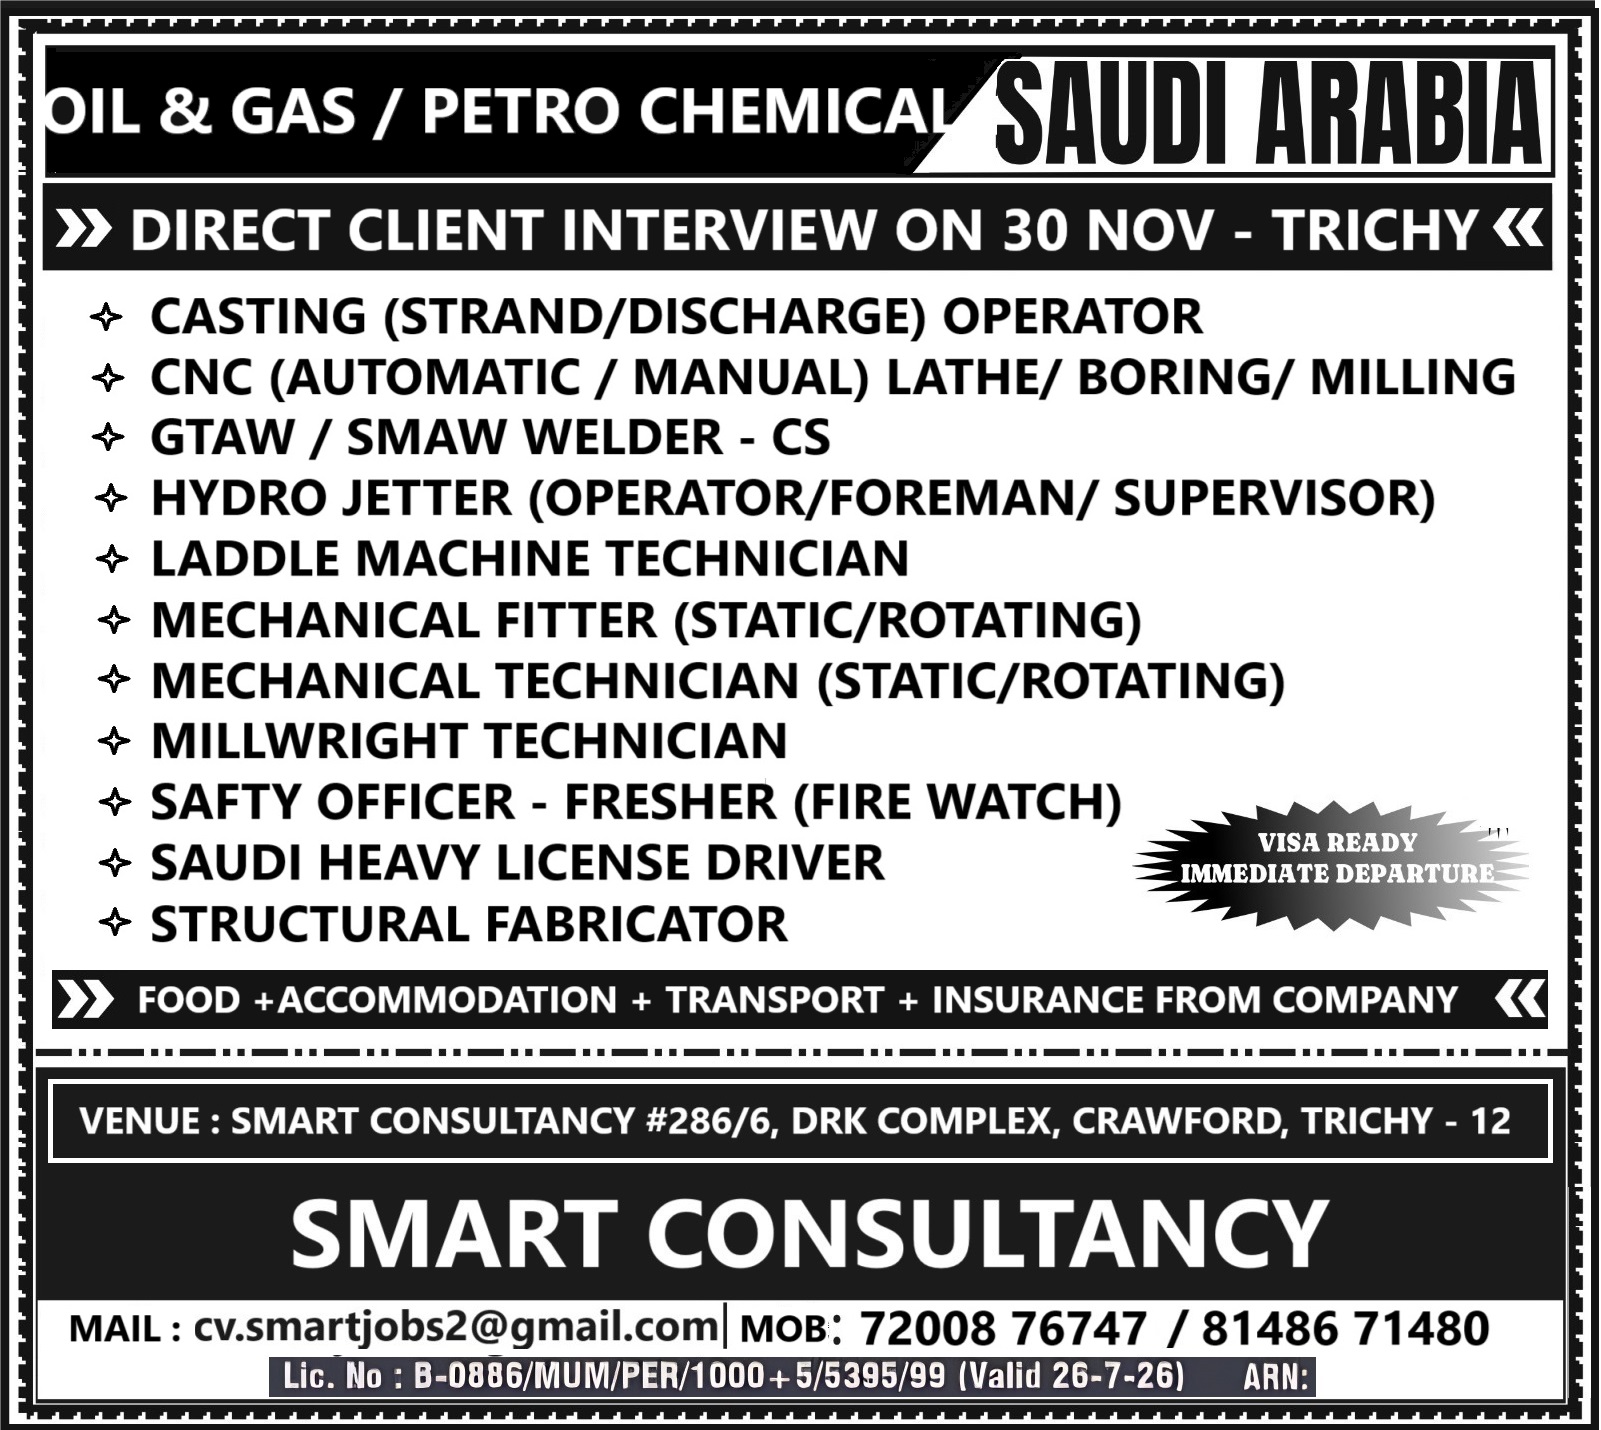 WANTED FOR A LEADING COMPANY - SAUDI ARABIA / DIRECT CLIENT INTERVIEW ON 30 NOV - TRICHY 